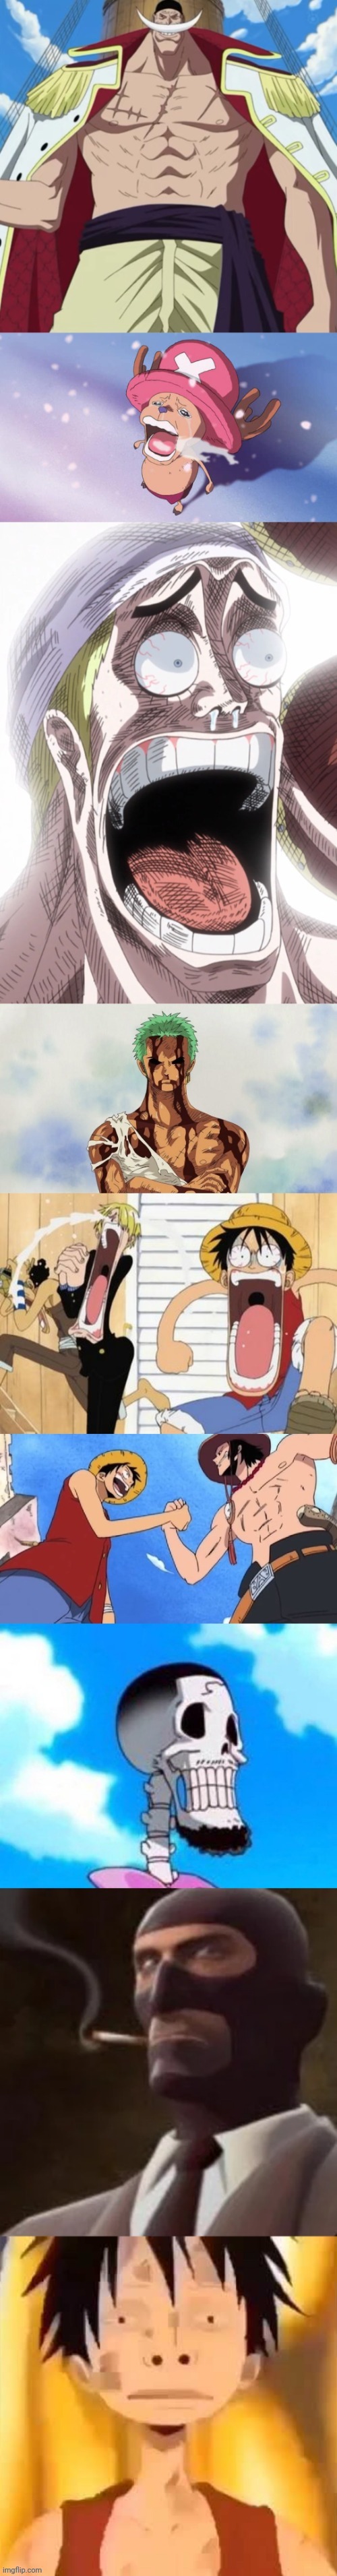 Perfectly normal one piece imagery | image tagged in one piece | made w/ Imgflip meme maker